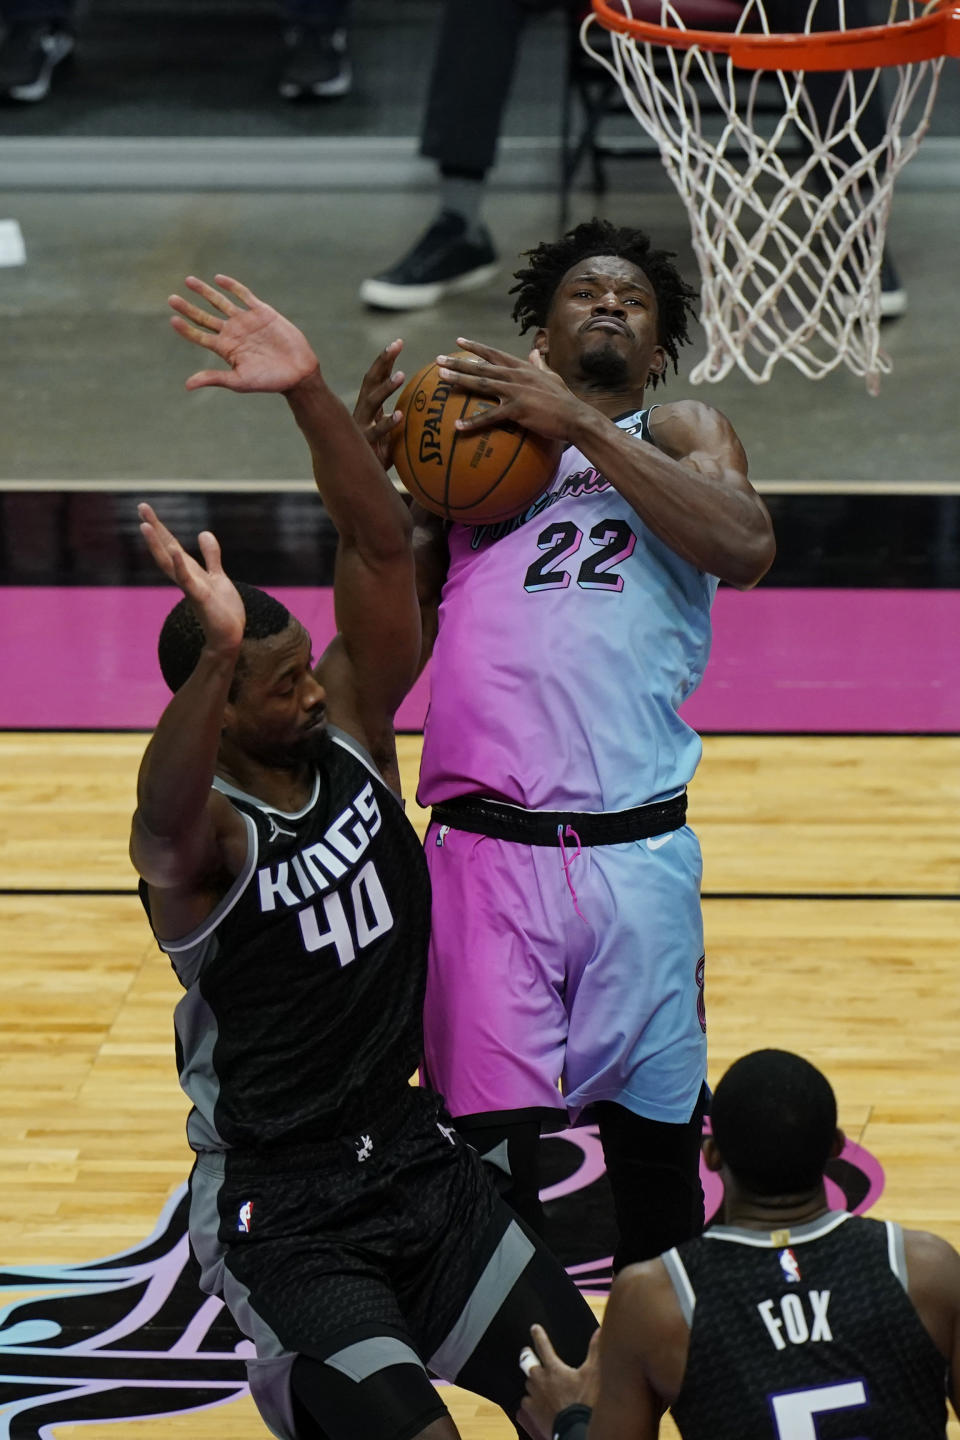 Sacramento Kings forward Harrison Barnes (40) fouls Miami Heat forward Jimmy Butler (22) as he drives to the basket during the second half of an NBA basketball game, Saturday, Jan. 30, 2021, in Miami. (AP Photo/Marta Lavandier)